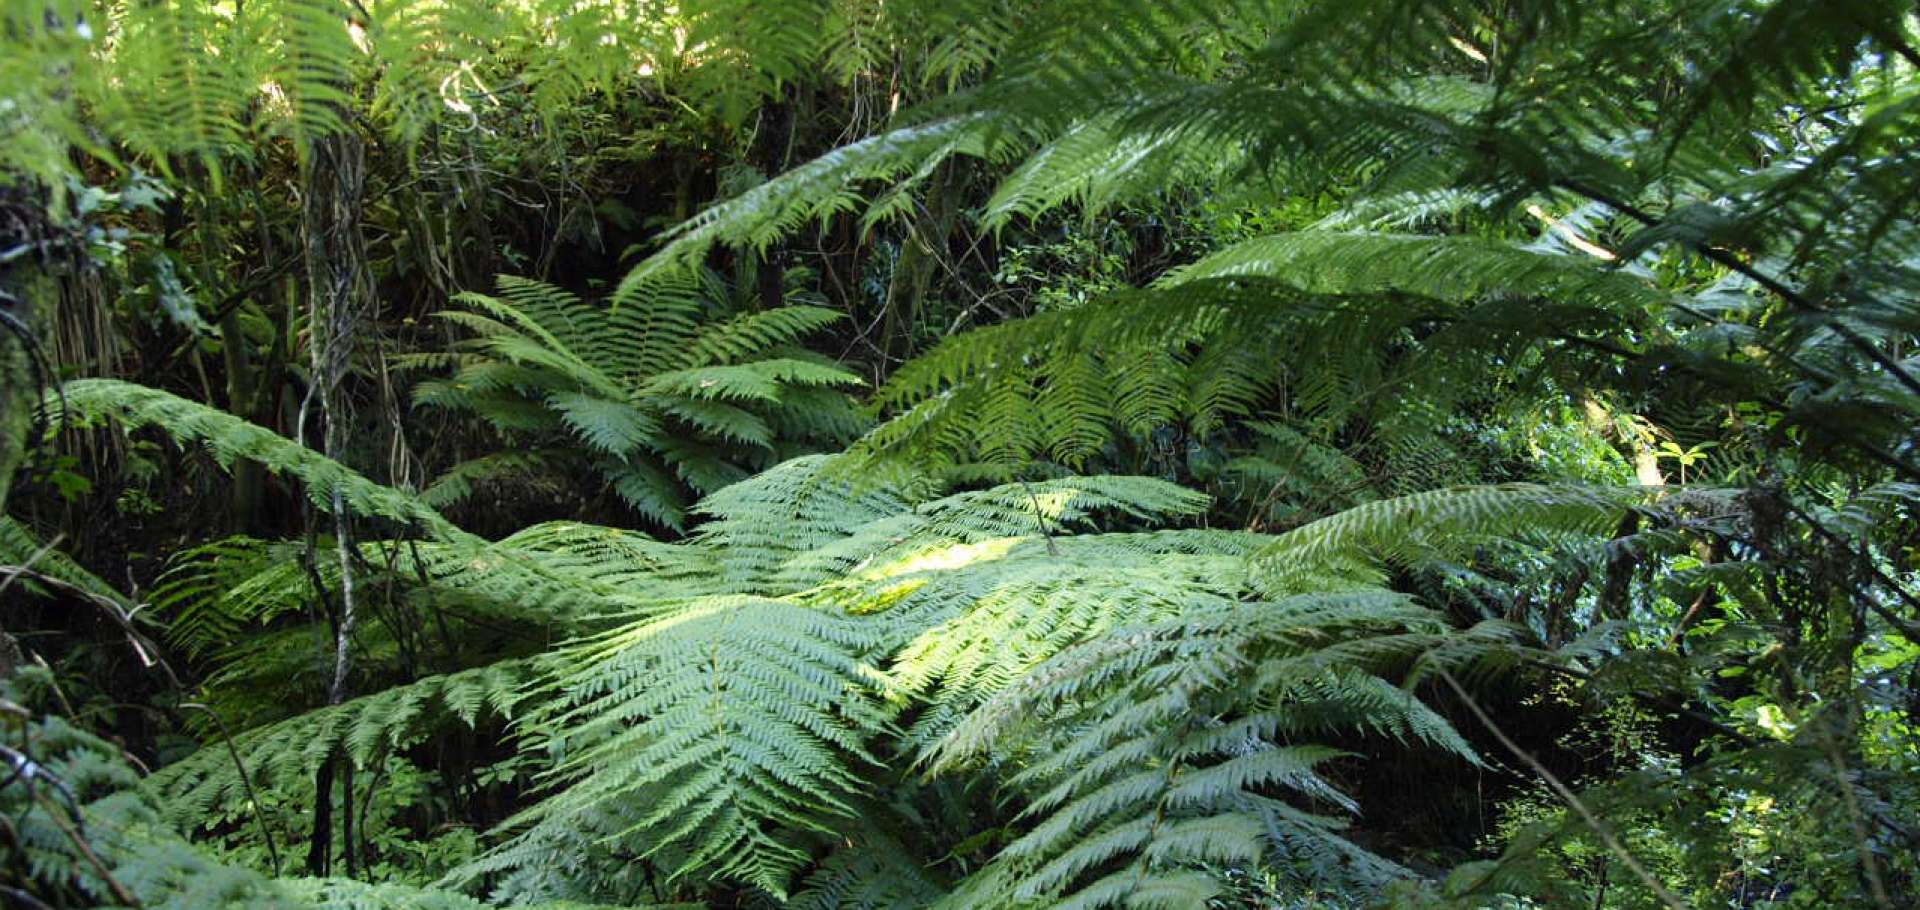 New Zealand Ferns and an Ancient Forest with Trees Over 400 Years O